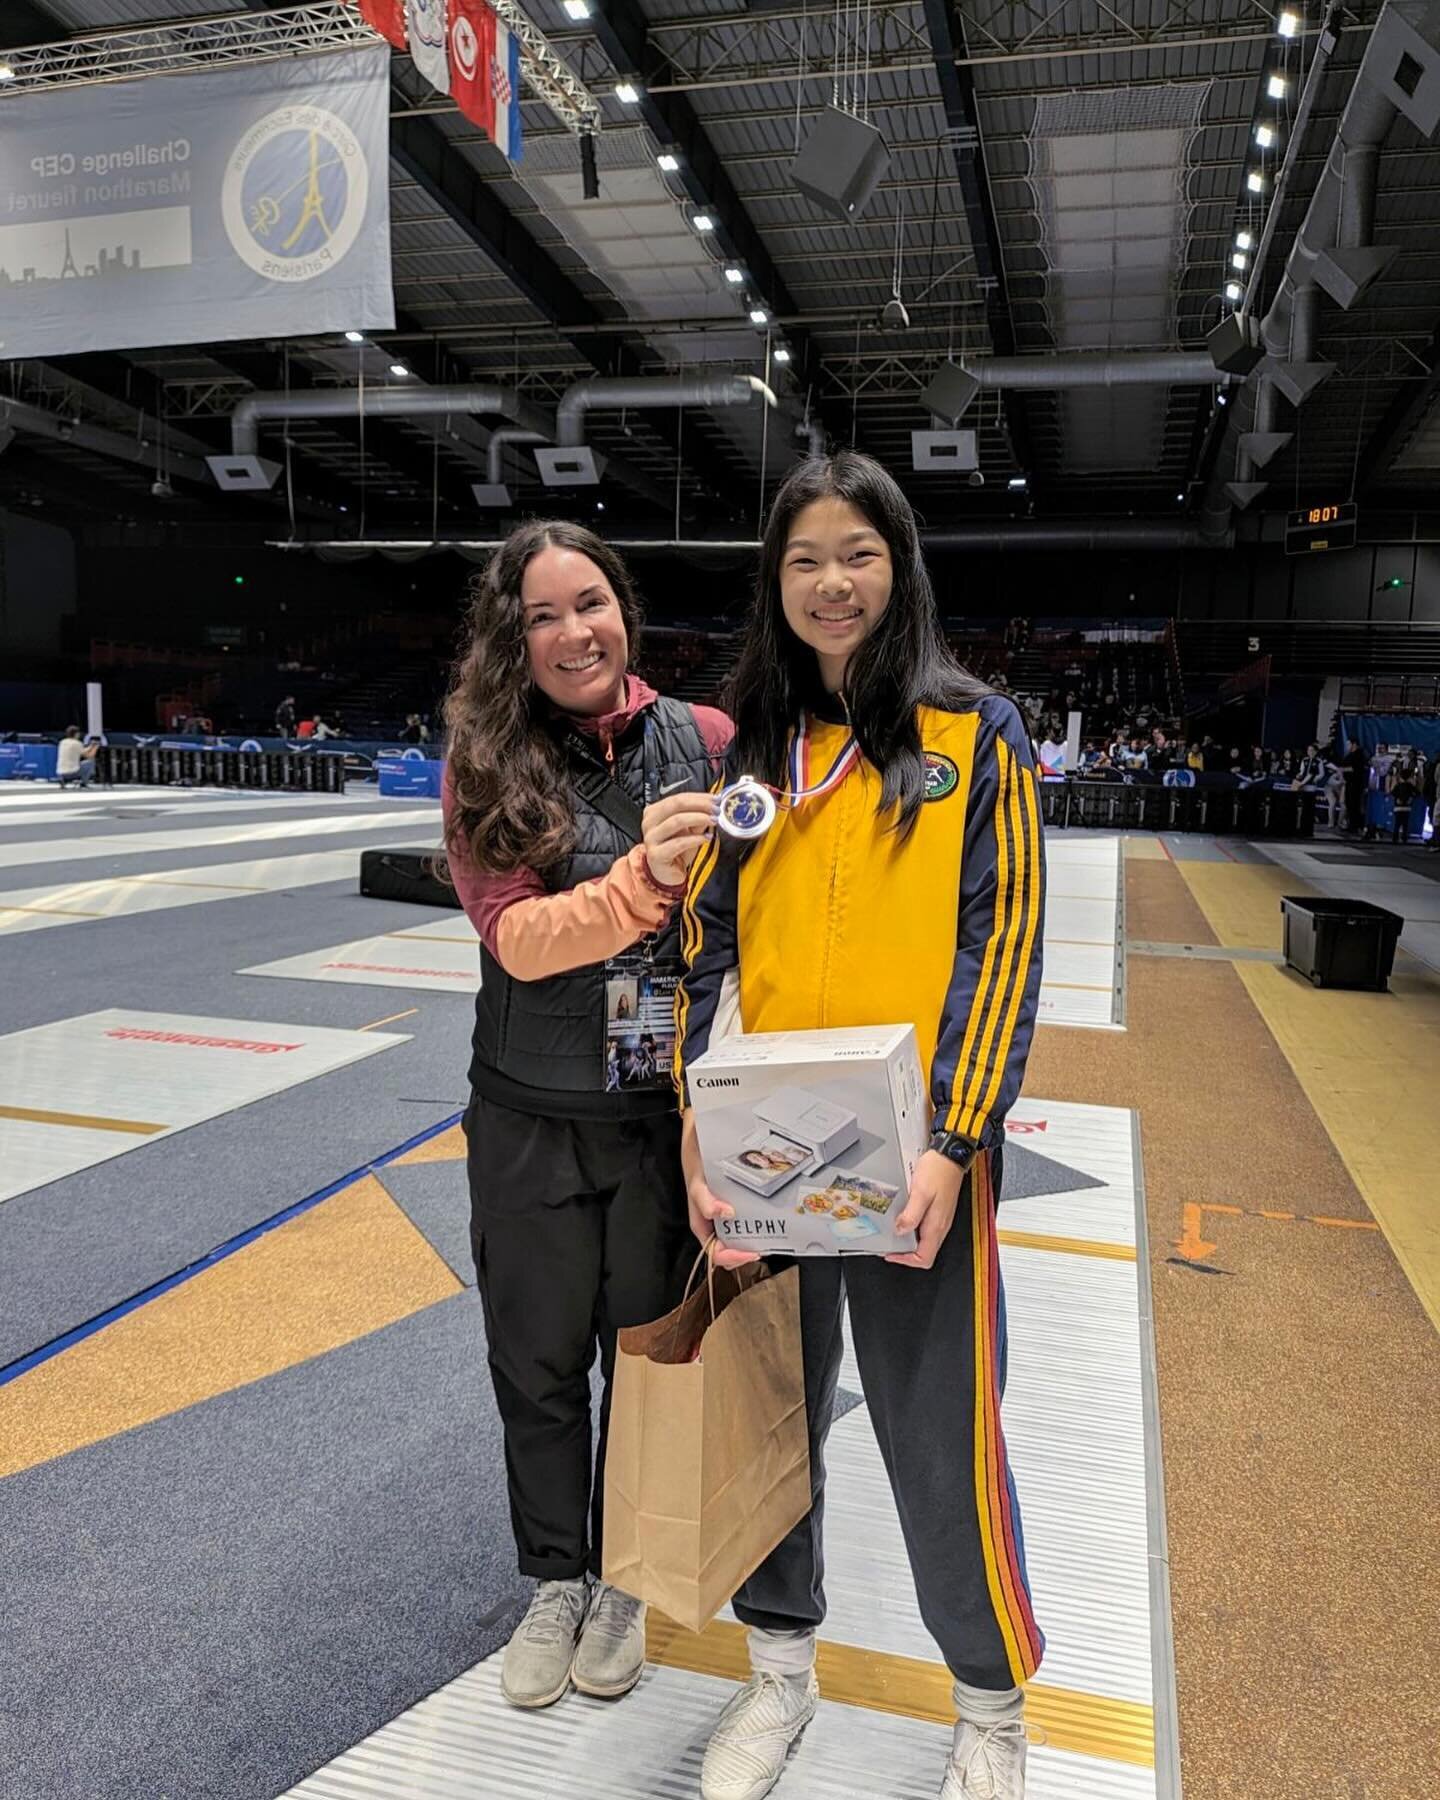 Silver Medal for Melissa at the Paris Marathon Foil. Congratulations on your first international medal! Thanks Allison for your coaching the MTeam over the weekend in Paris.